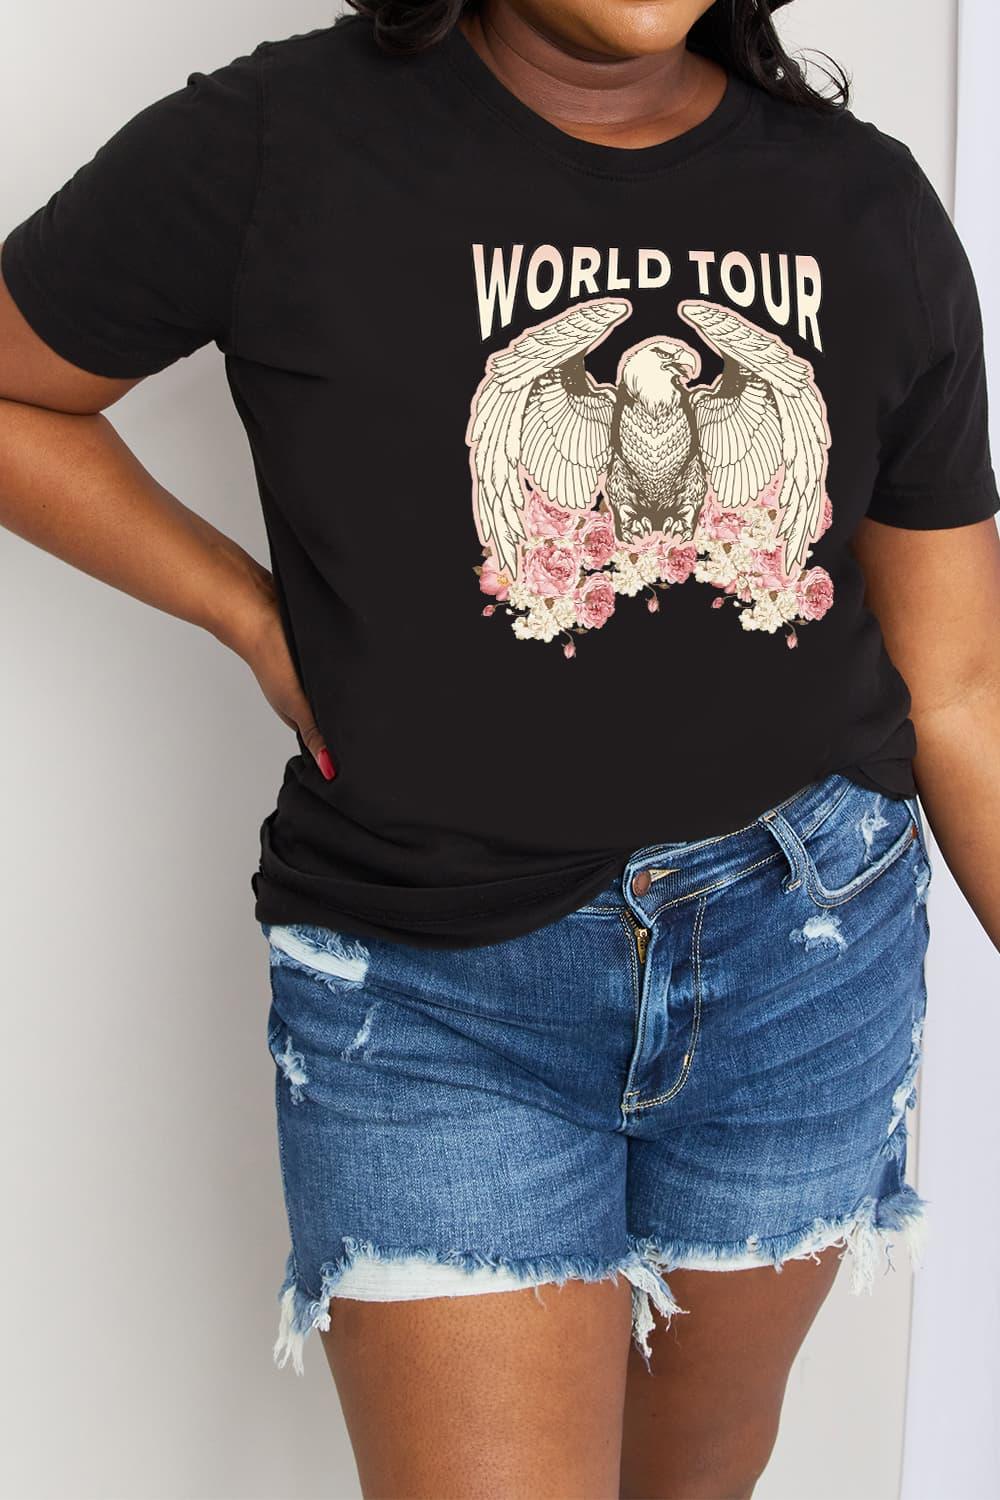 Simply Love Full Size WORLD TOUR Eagle Graphic Cotton Tee